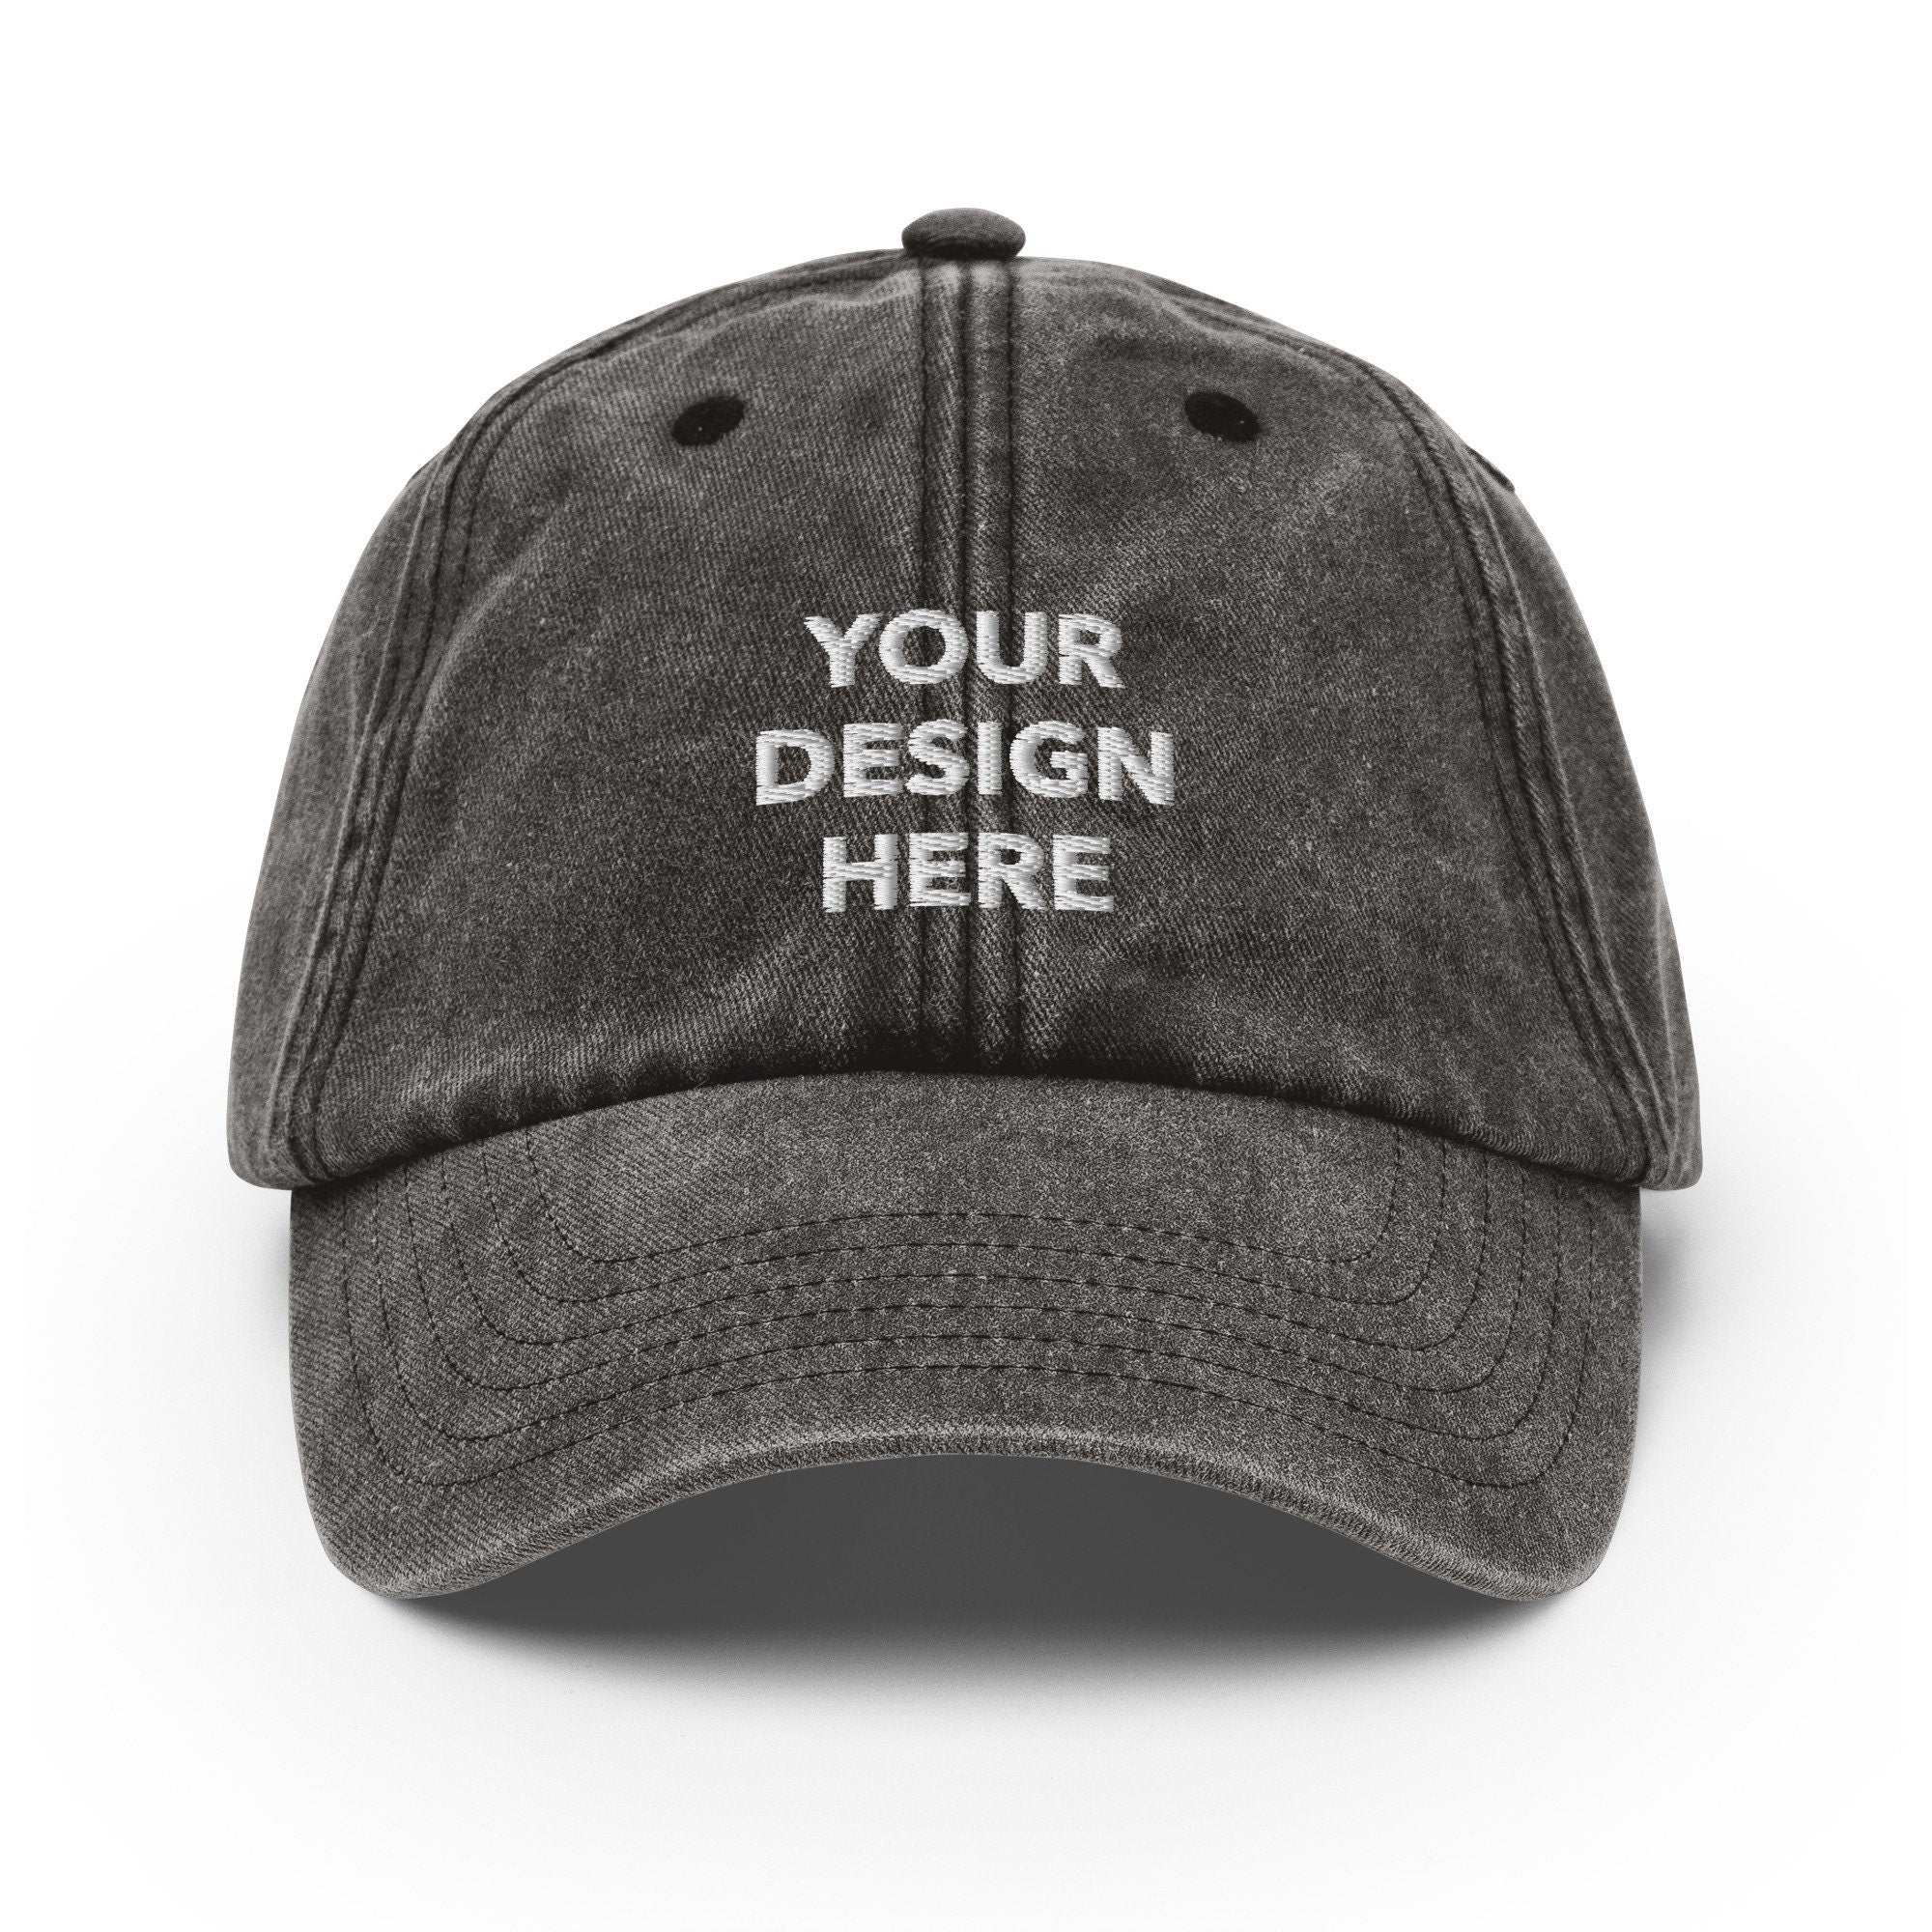 Personalized Embroidered Vintage Hat, Customized Logo Hat, Embroidery With Your Own Text or Design, Handmade Custom Aged Cap